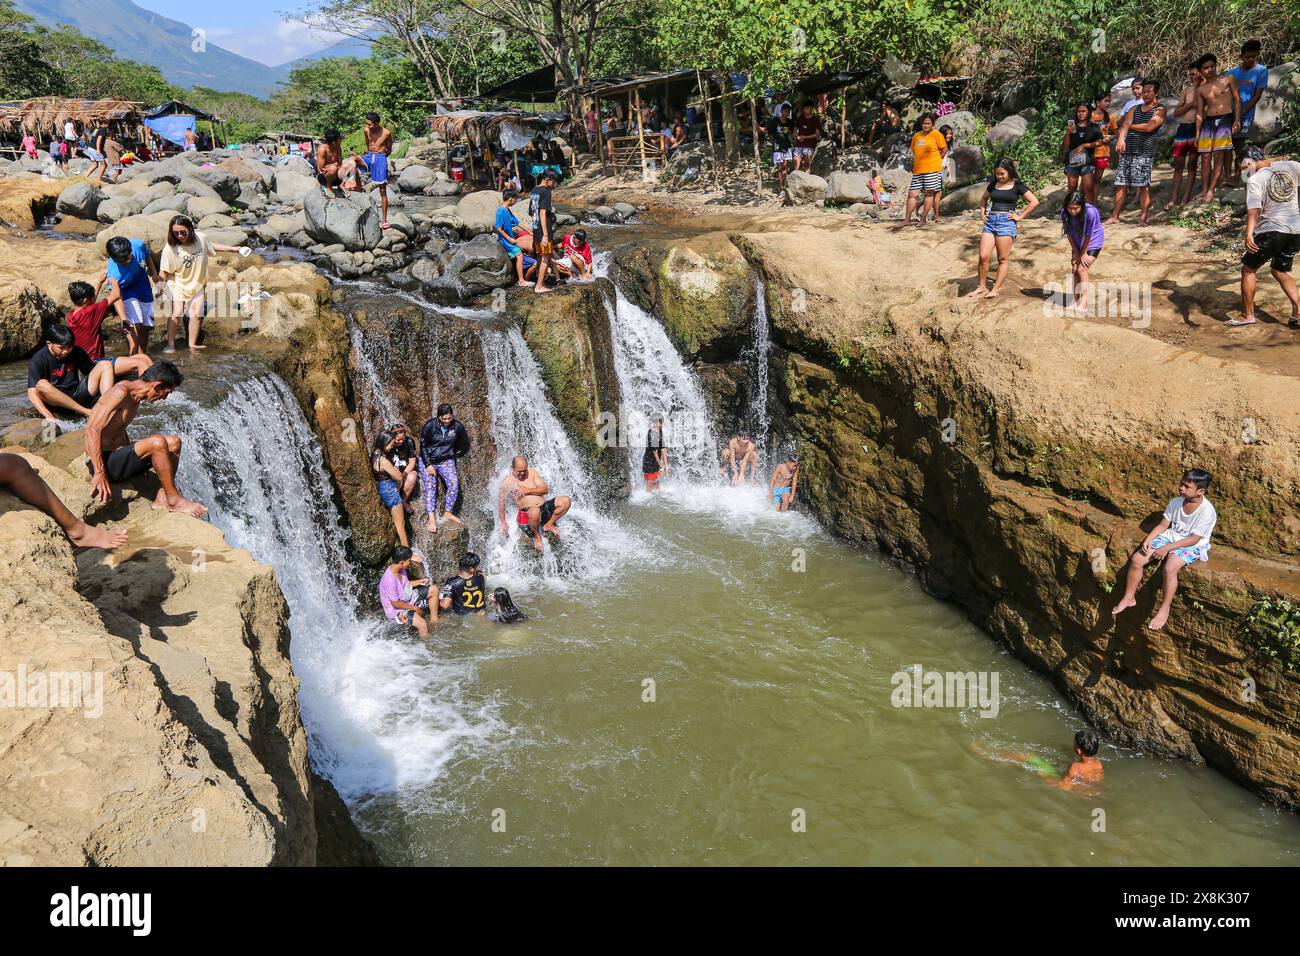 Dolores, Philippines. May 25,2024: Filipinos flock to streams that have not dried up to escape cities' stifling heat. In Calabarzon, some find refuge at Paeng Falls, a new destination created by Typhoon Paeng(2022). Streaming from Mount Banahaw, a sacred mountain prone to landslide, erosion & destructive flashfloods, Lagnas riverbed subsided to form these waterfalls highly appreciated as the archipelago & Southeast Asia suffer of severe heatwave & drought due to El Nino which will end with tropical depression Aghon, first storm to hit the country this year. Credit: Kevin Izorce/Alamy Live News Stock Photo